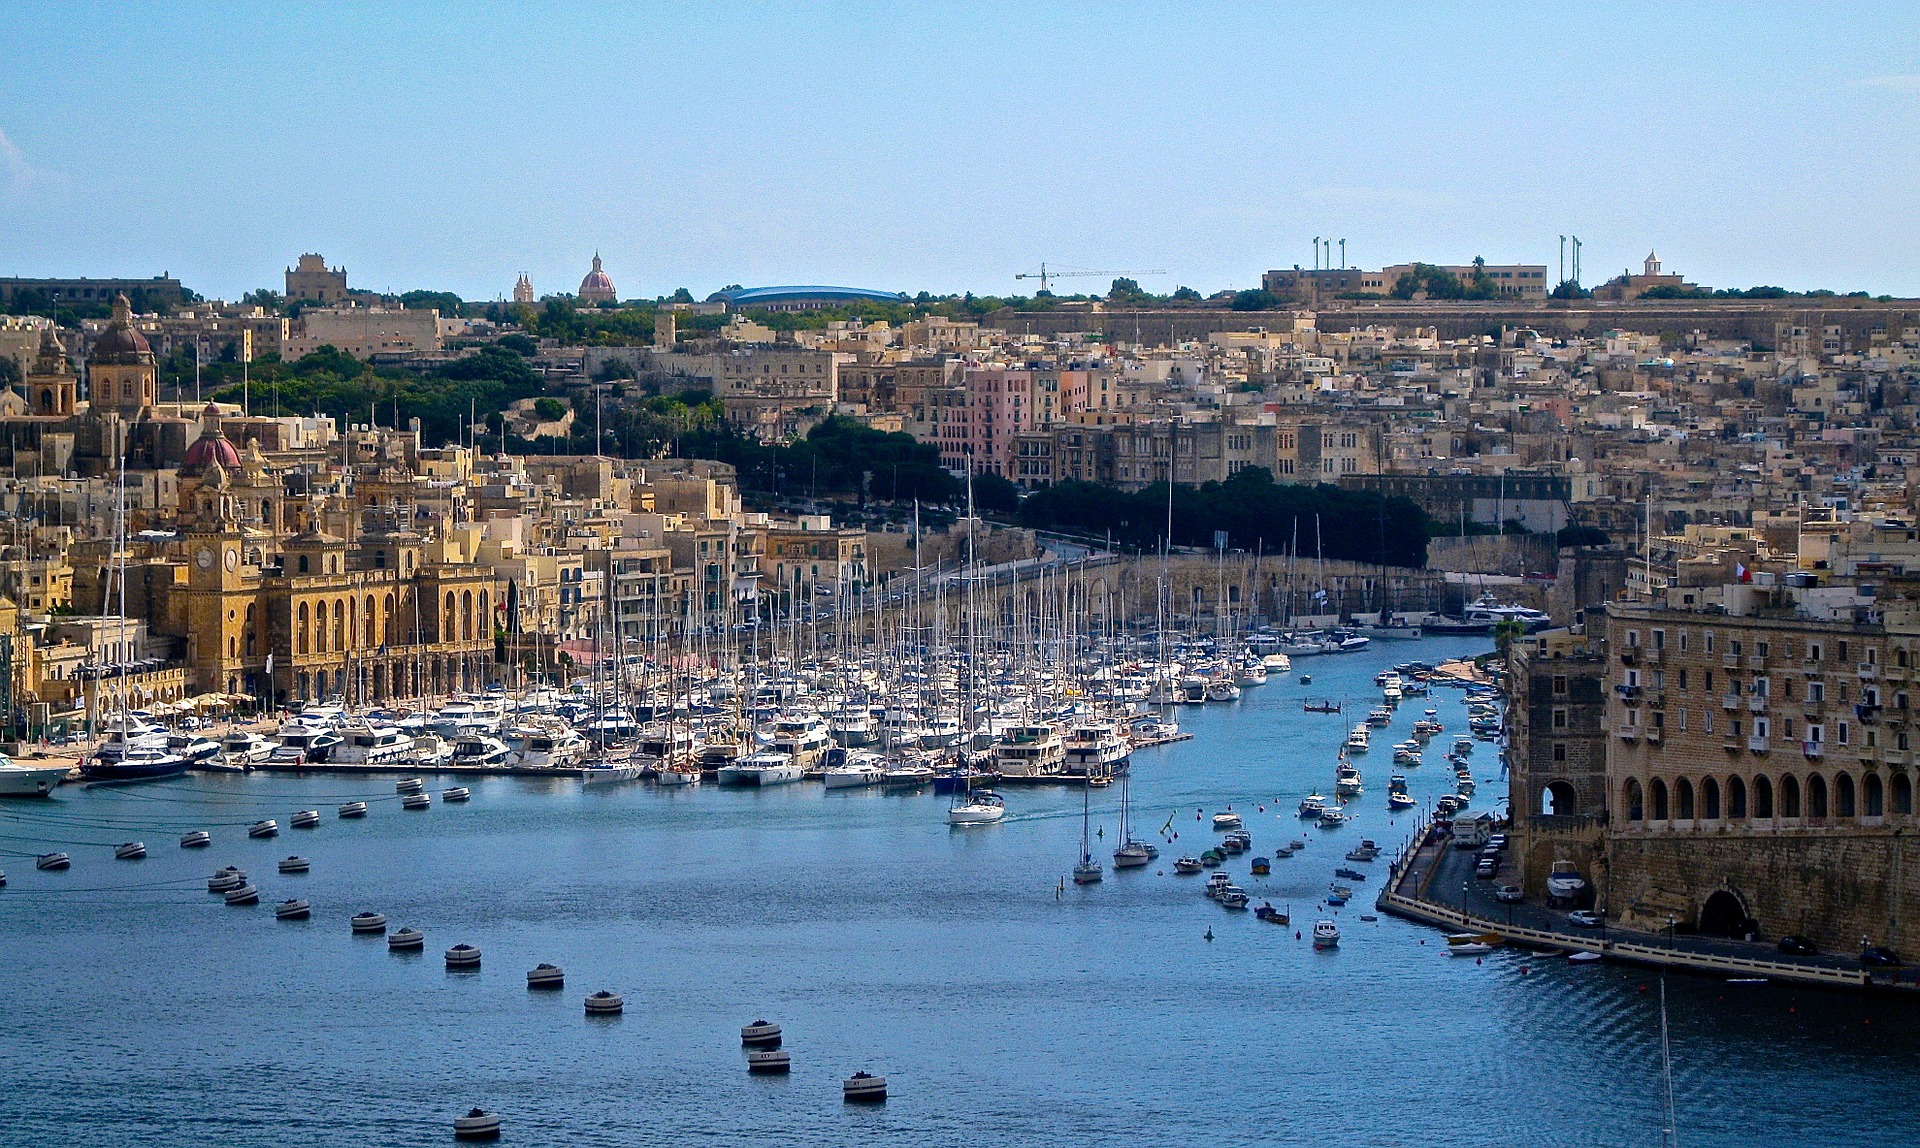 10 steps to starting a business in Malta